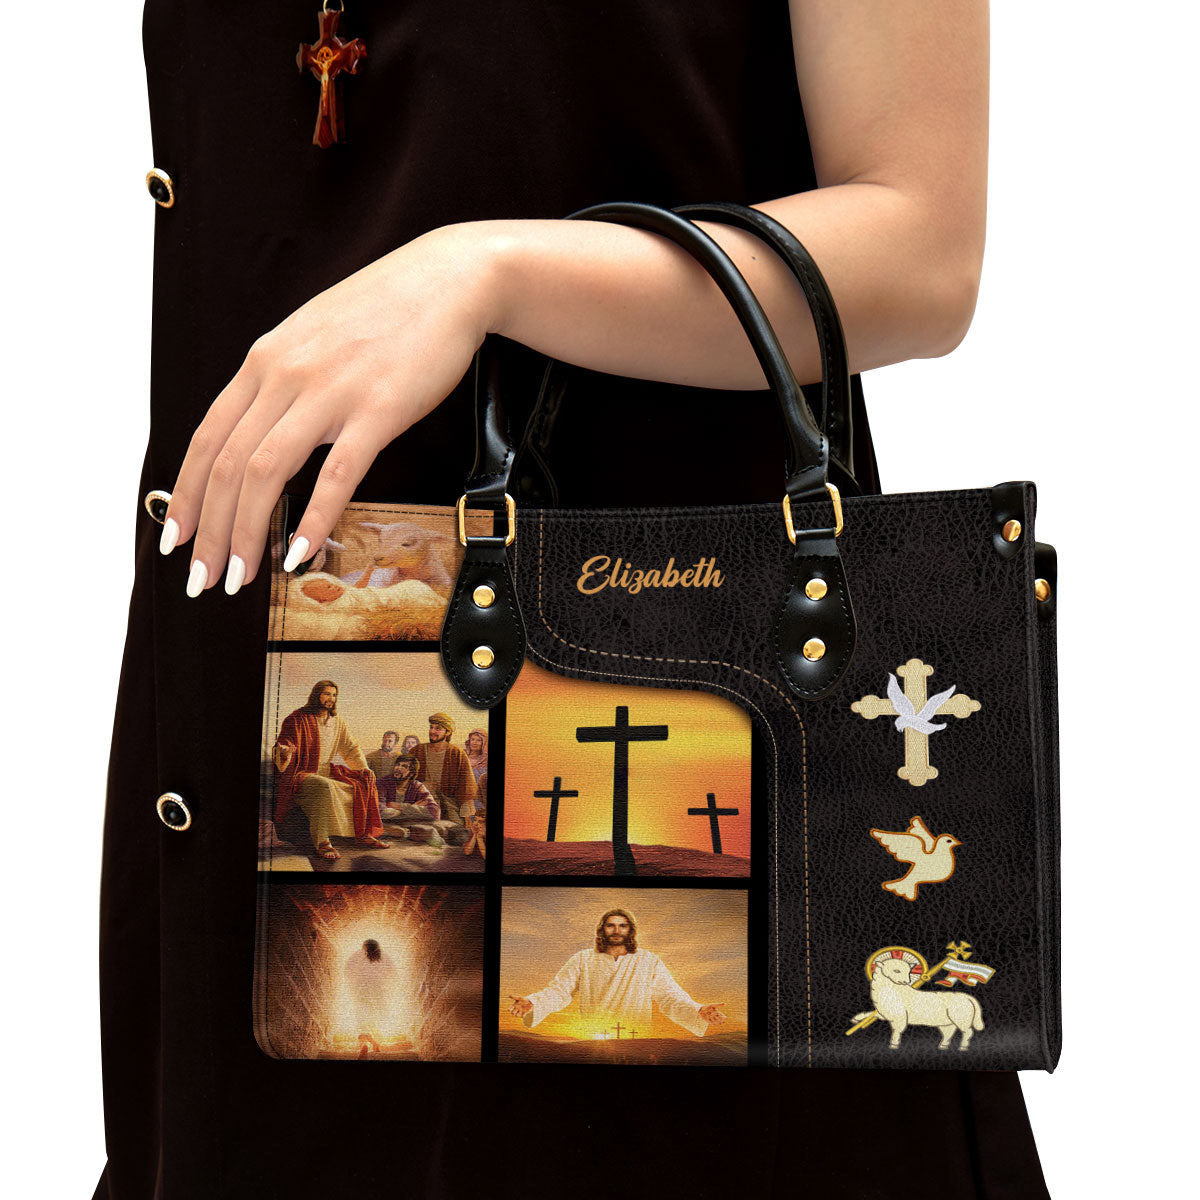 Jesus Lamb Cross Leather Bag - Personalized Leather Biblle Handbag - Gifts For Women Of God